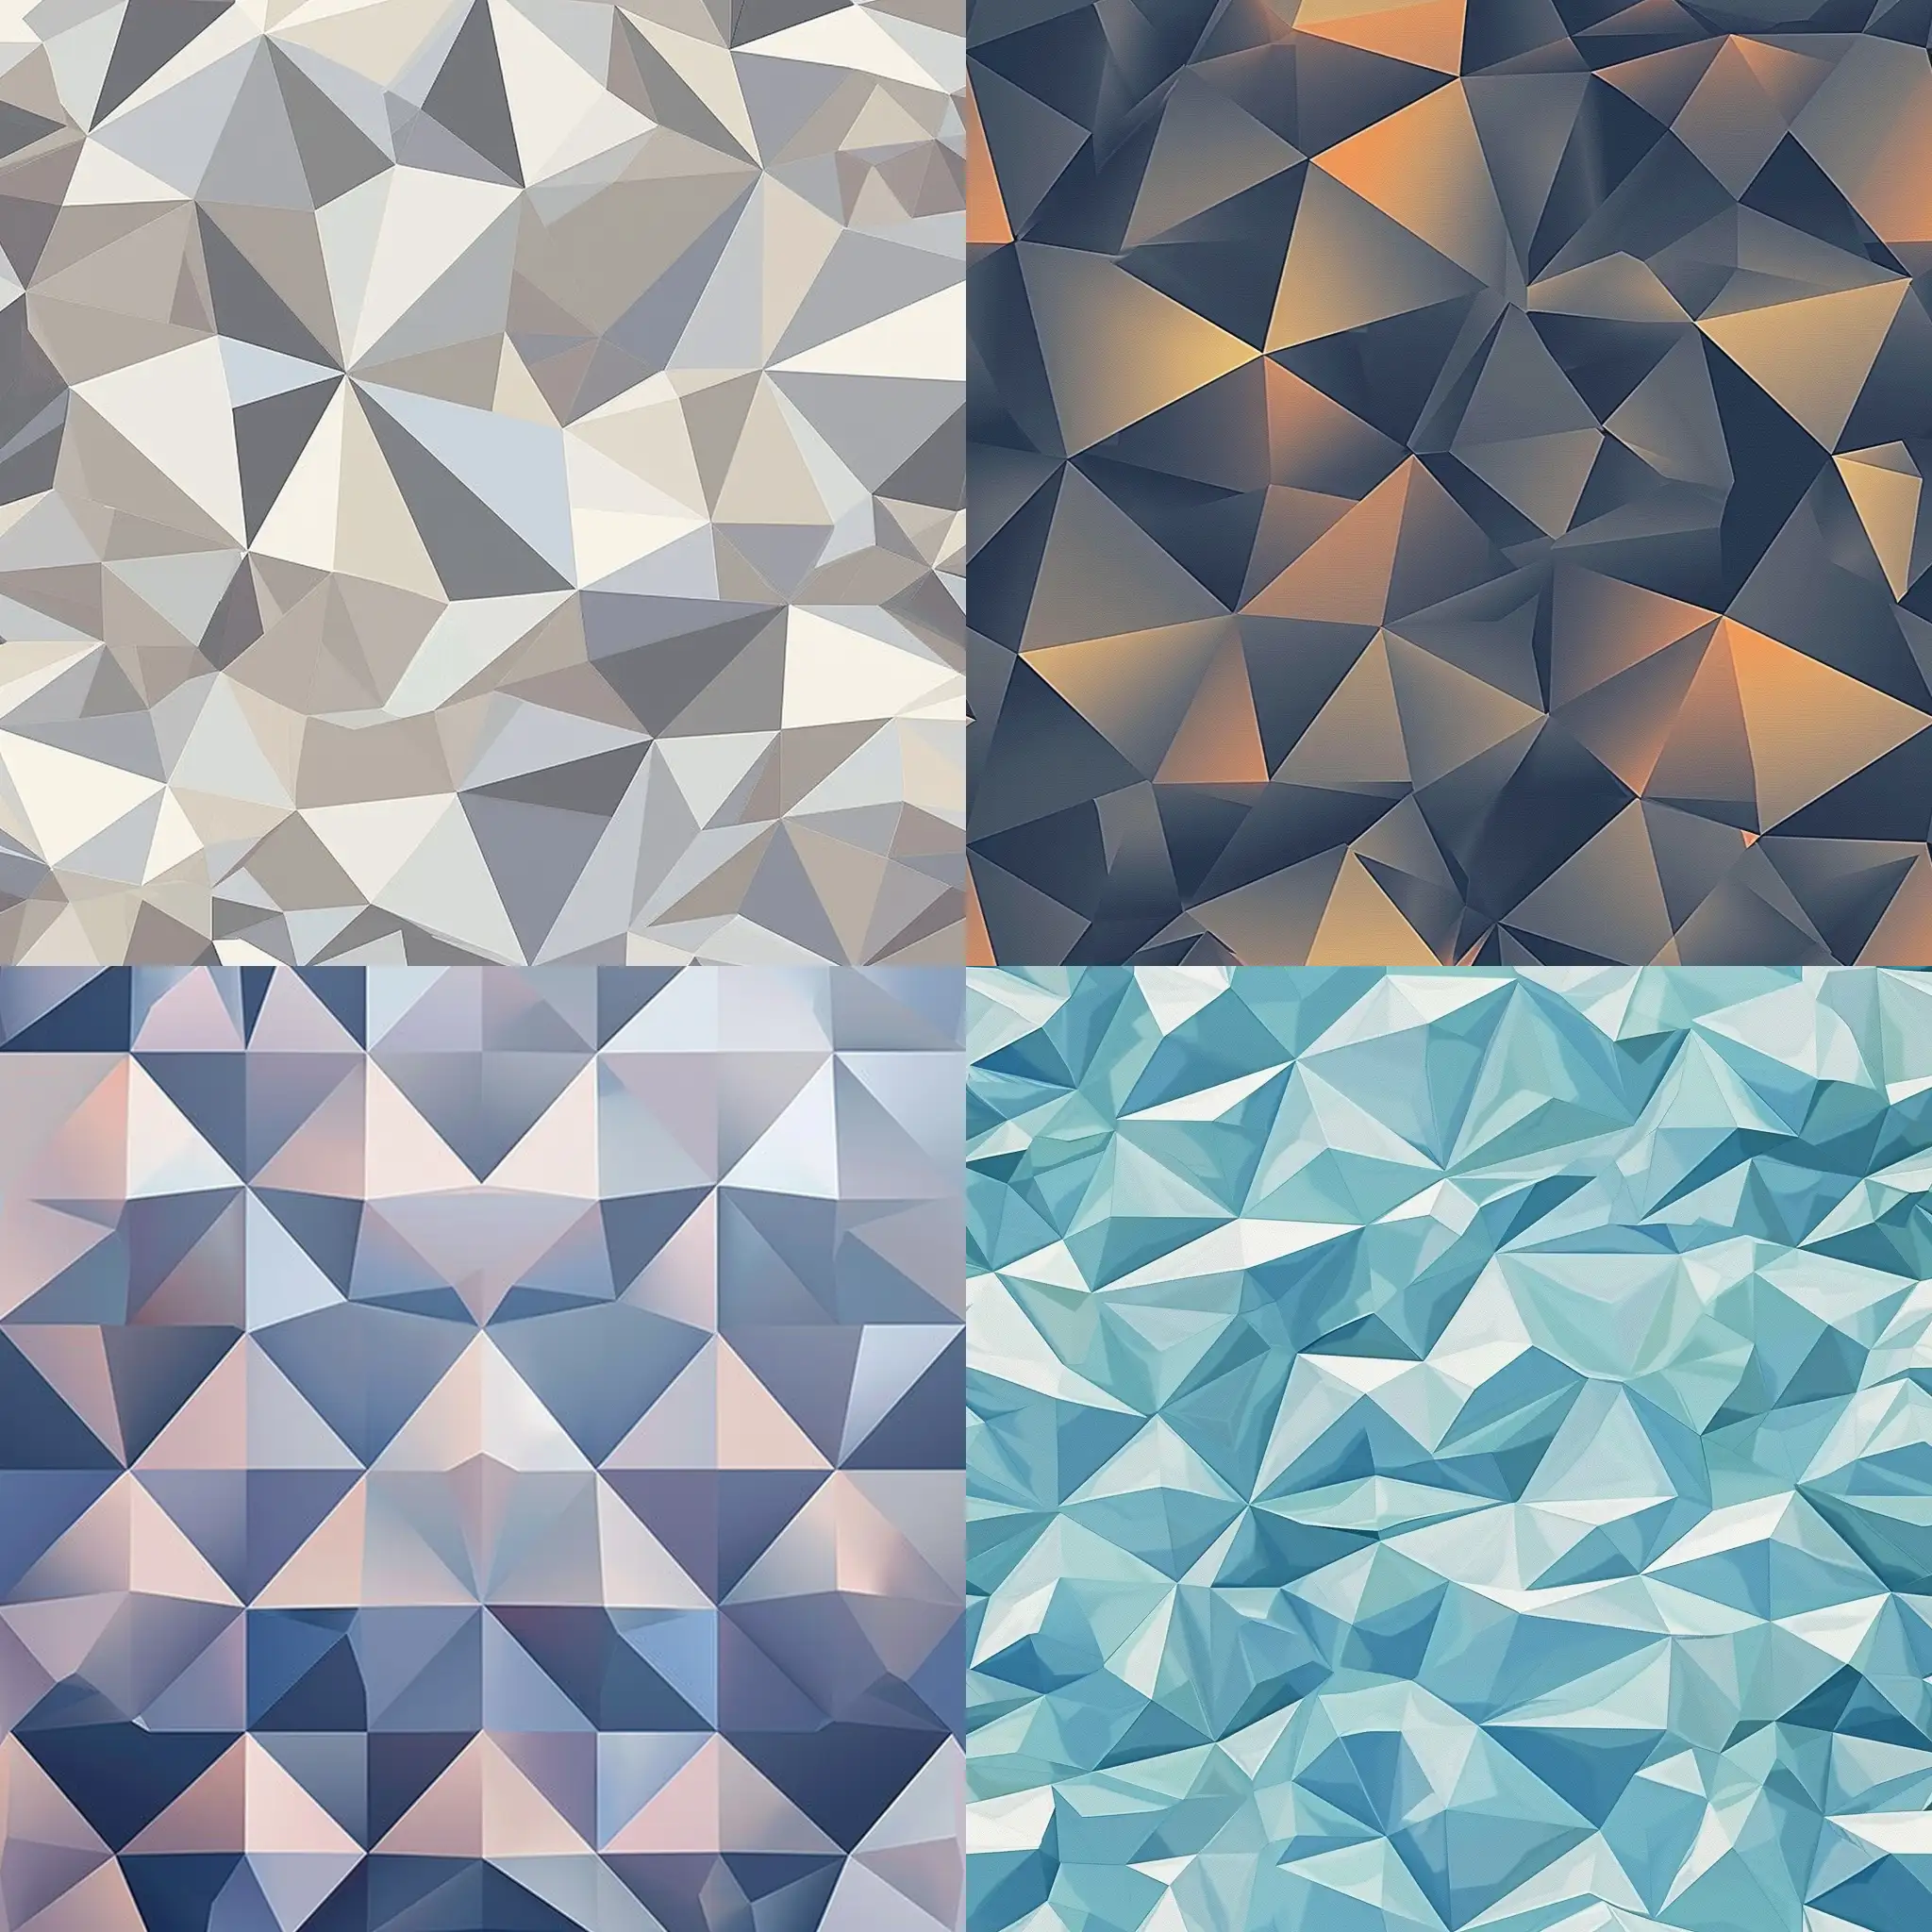 Design a simple geometric pattern background with polygons using #EA843D. The shapes should be minimal and evenly distributed. The overall pattern needs to be subtle enough to serve as a background for images, adding a touch of modernity and tech motif.
